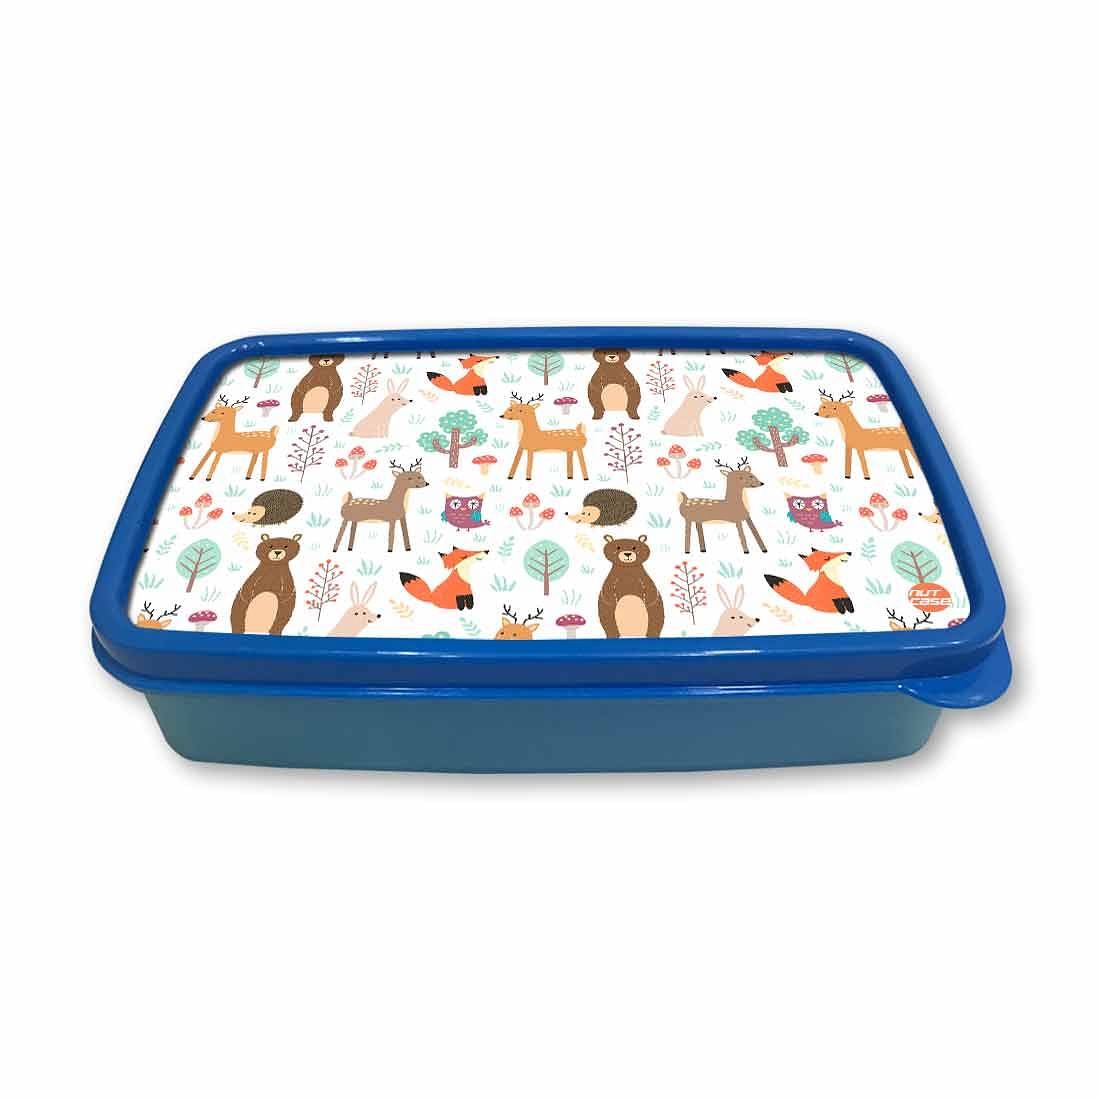 Childrens Plastic Lunch Box for Snacks Boys School Containers - Animals Nutcase